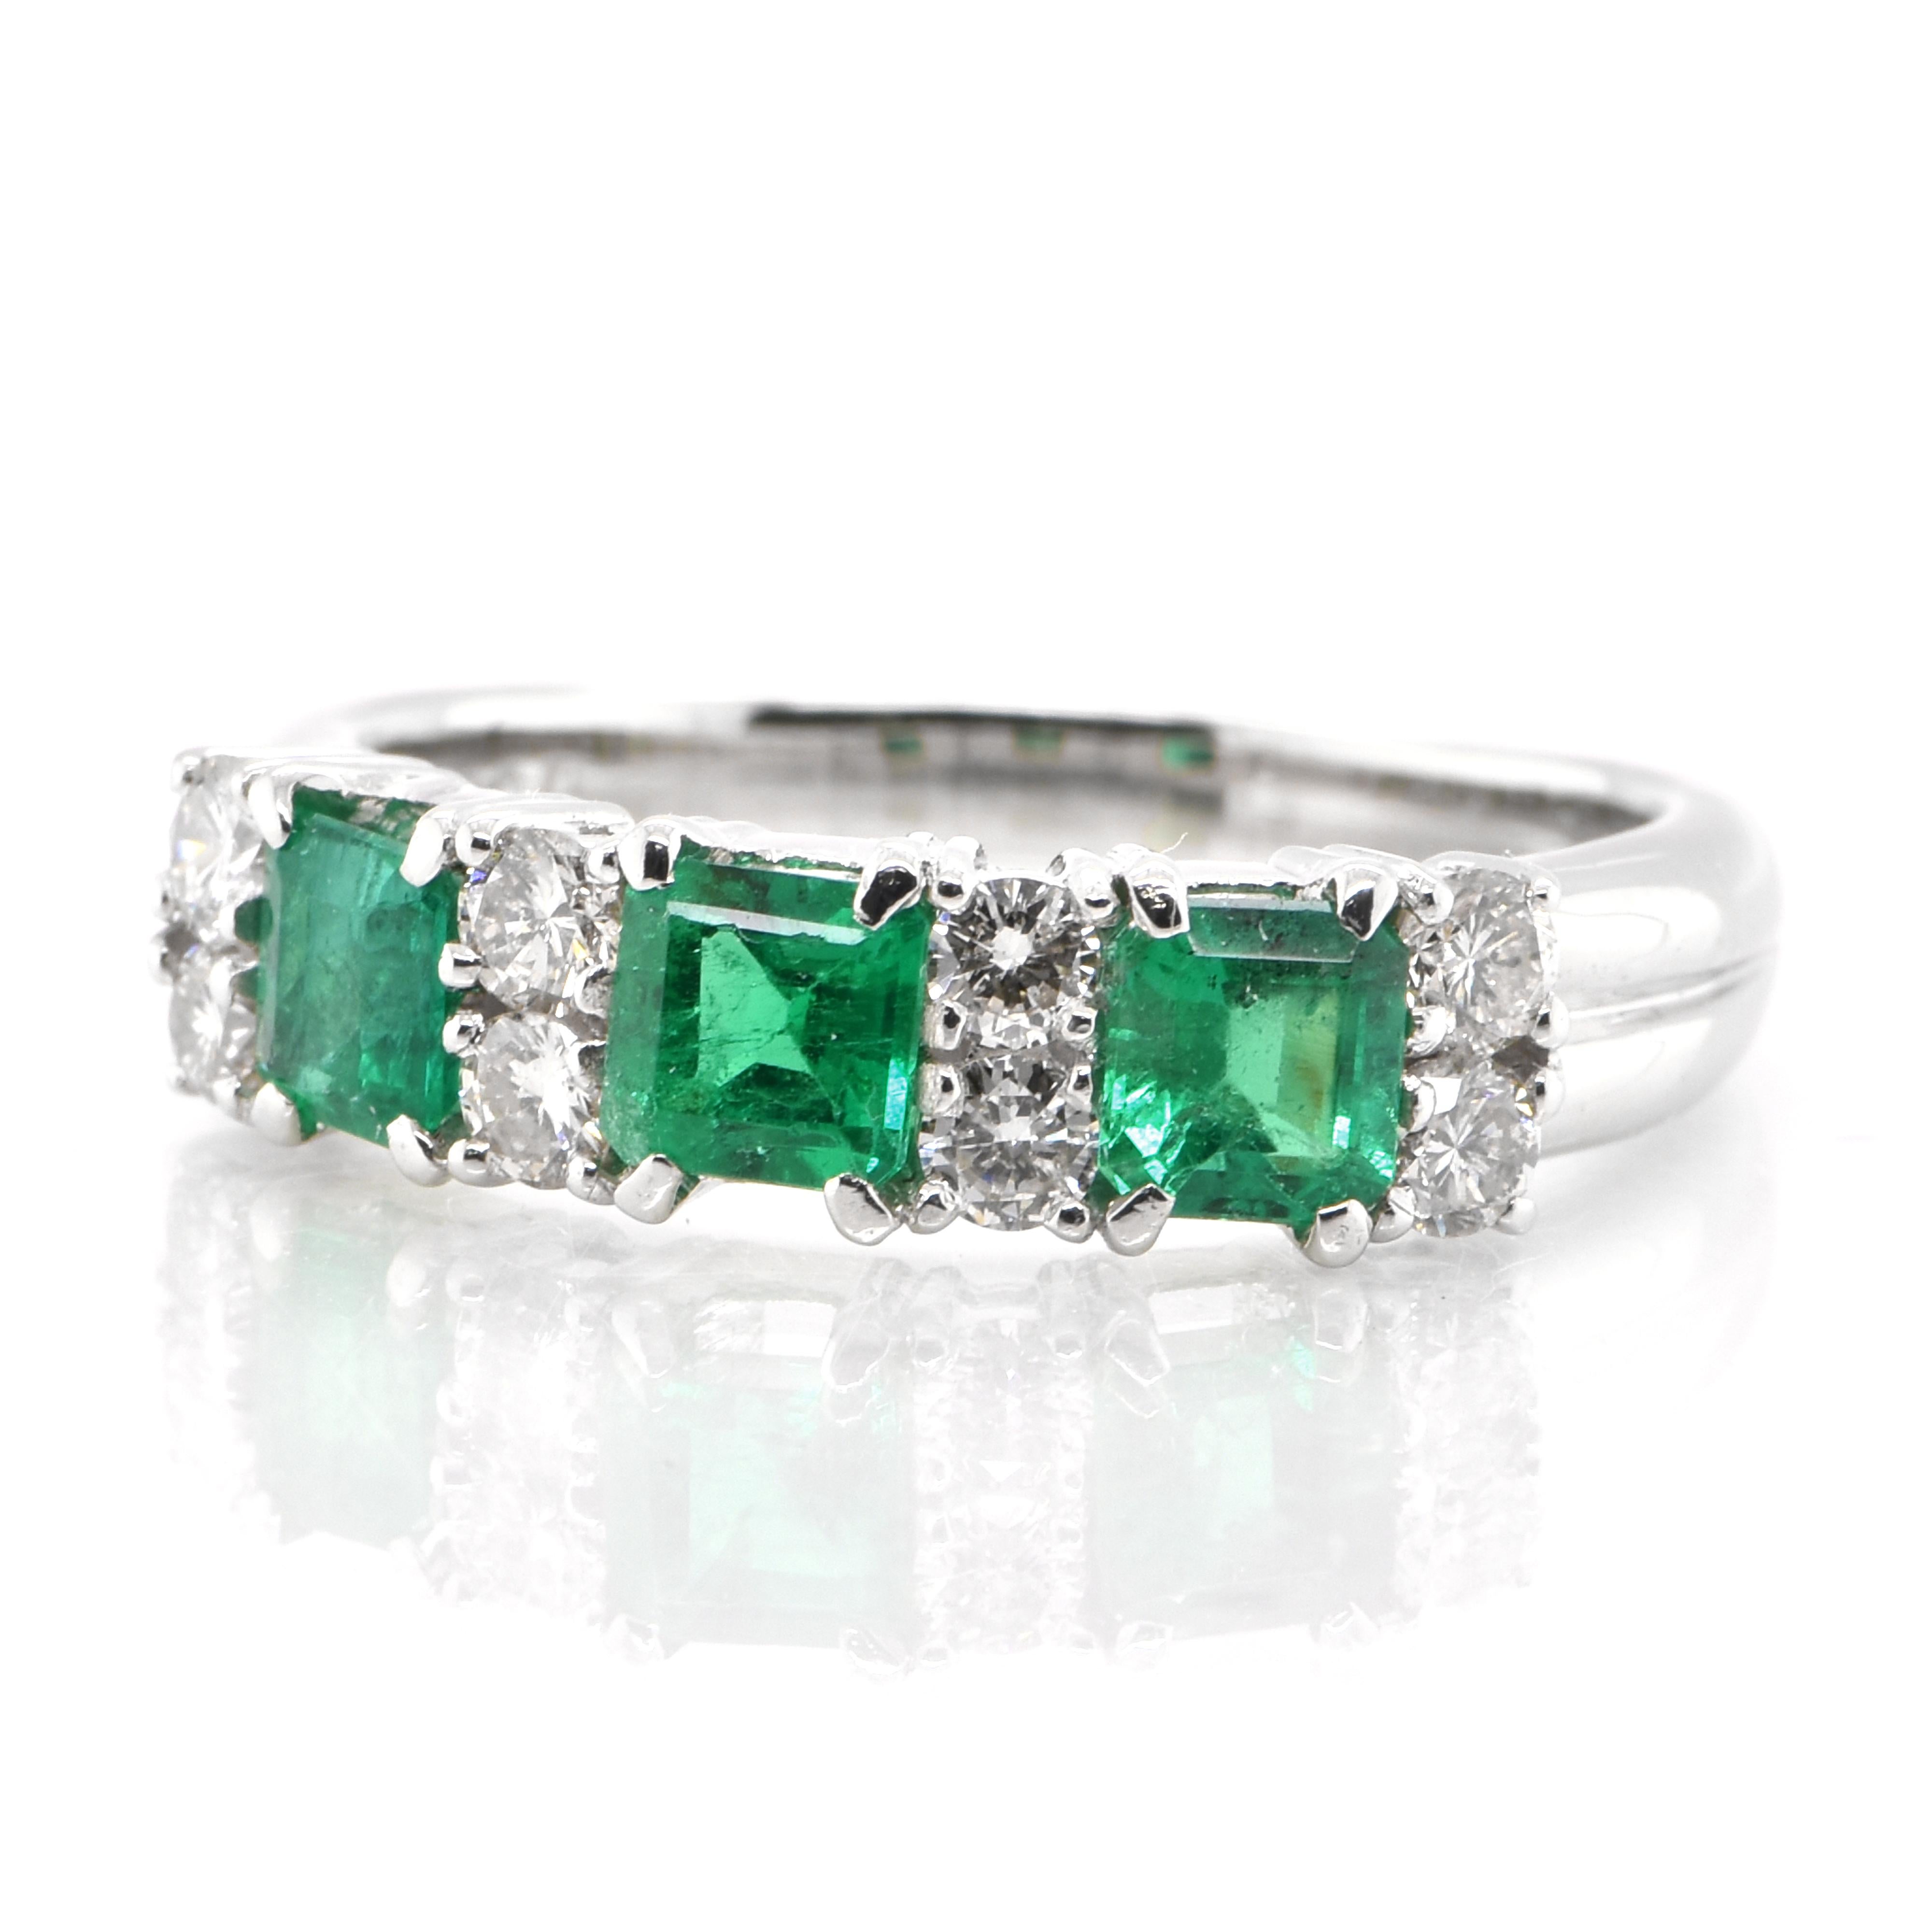 A stunning Half Eternity Ring featuring a total of 1.03 Carats Natural Emerald and 0.55 Carats of Diamond Accents set in Platinum. People have admired emerald’s green for thousands of years. Emeralds have always been associated with the lushest